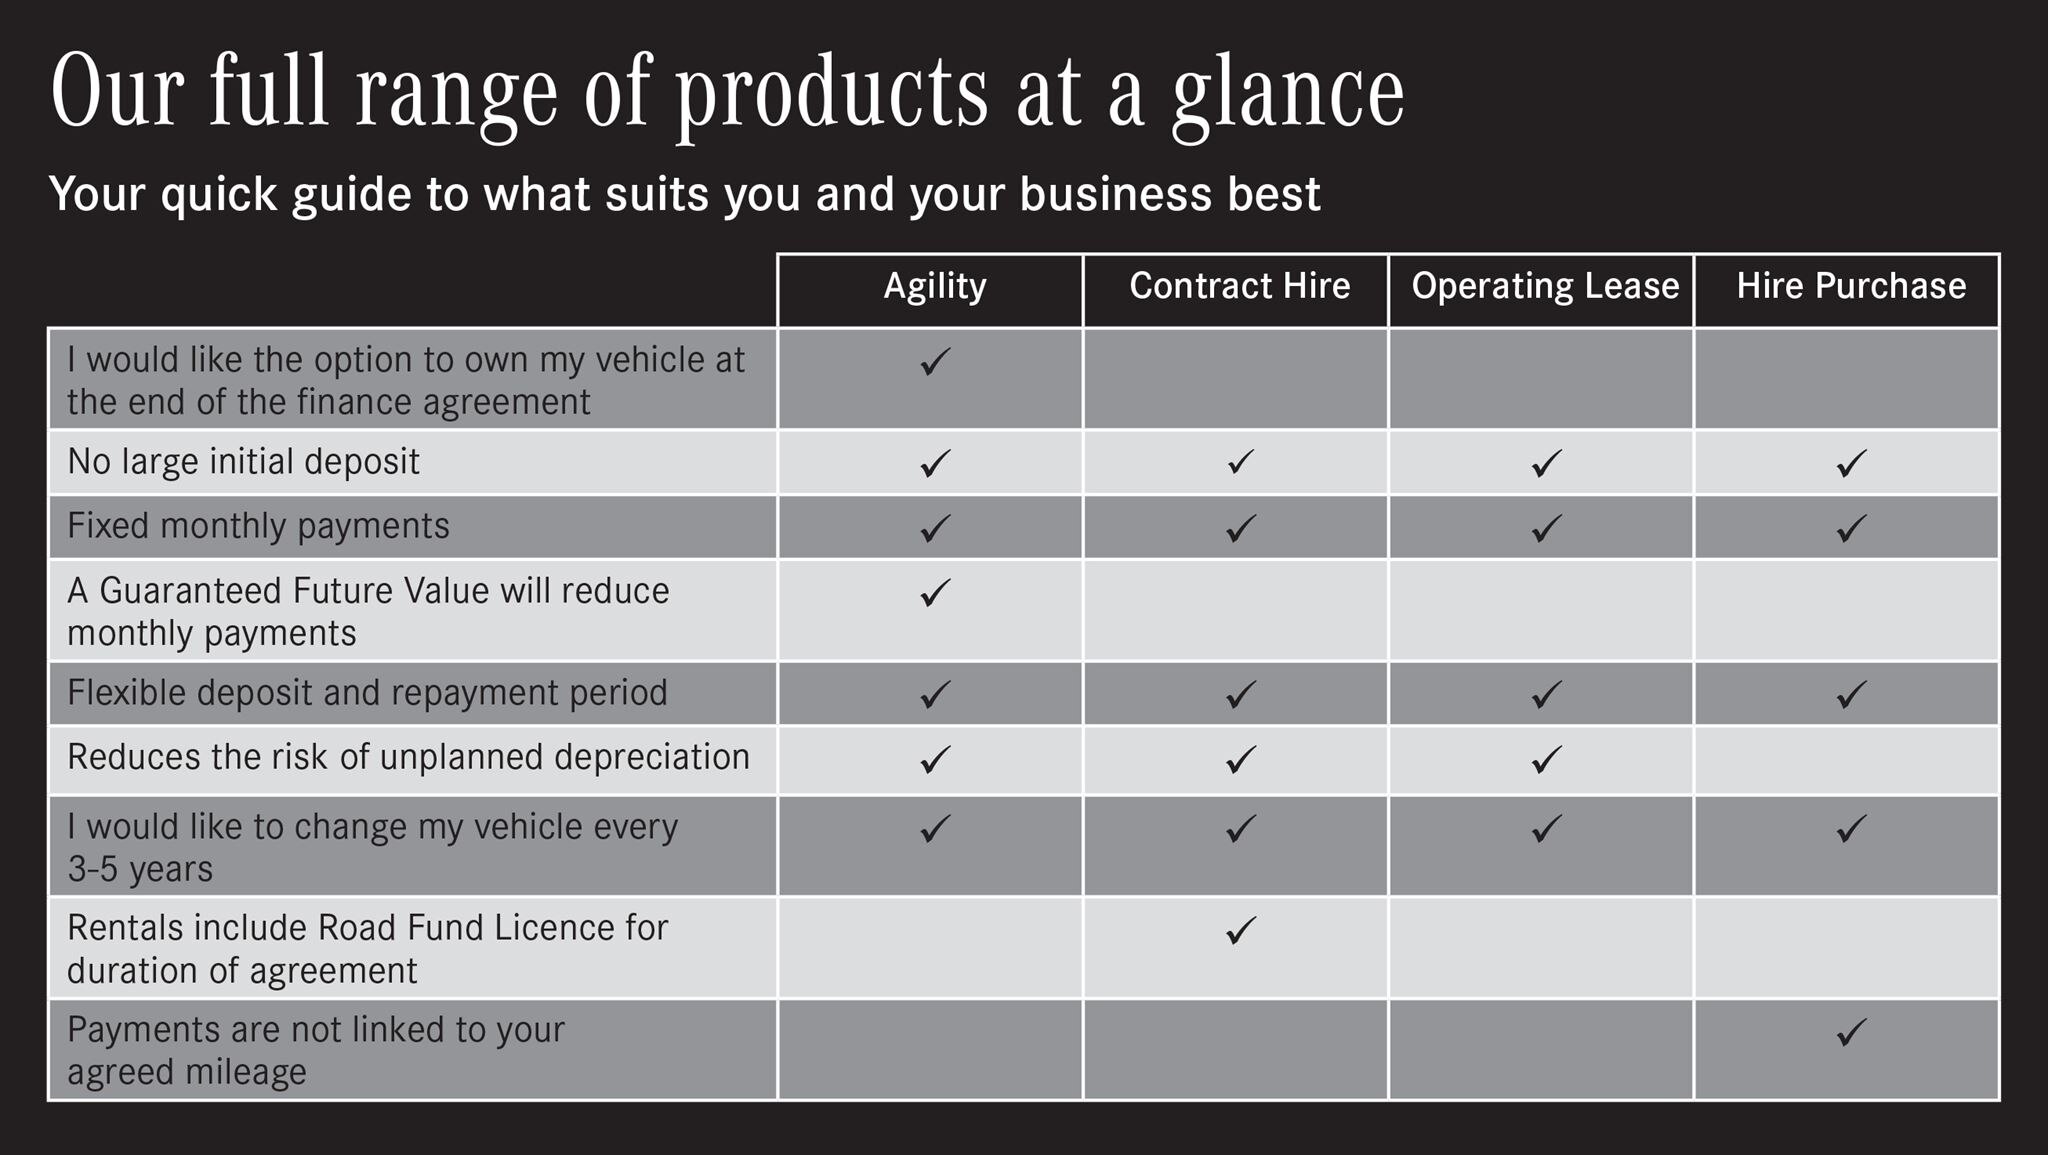 graphic defining finance options including Agility, Contract Hire, Operating Leases and Hire Purchase